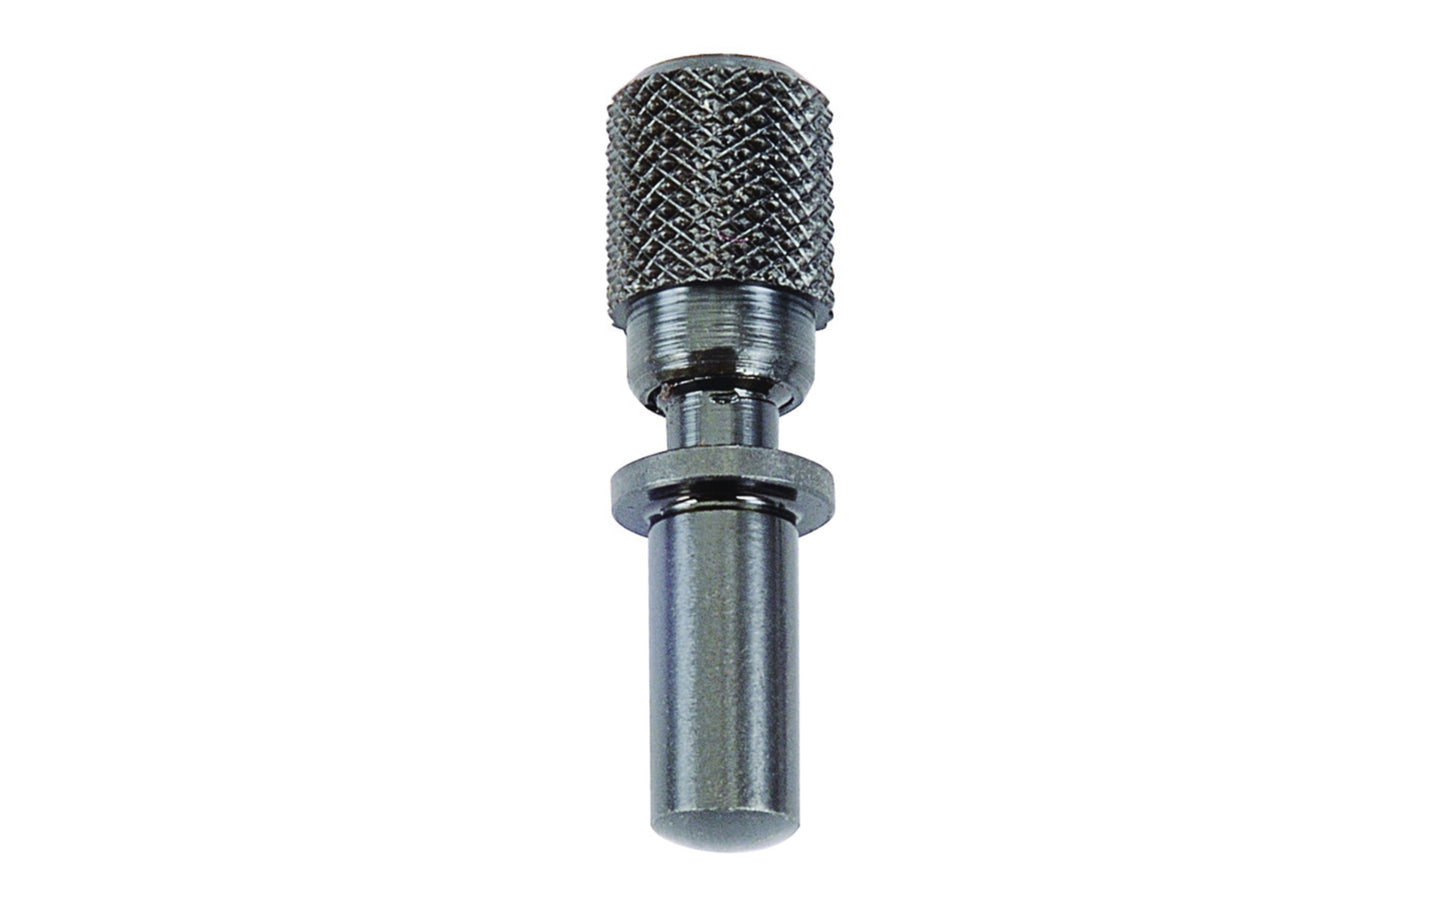 Starrett 657Y Indicator Attachment. Starrett 1/4" (6.3mm) O.D. one end, other end threaded and fits lug backs of all AGD indicators (Starrett Series 81, 25, 655, 656) and Series 80 Miniature Indicators. Indicator Attachment. 049659527650.   Made in USA.